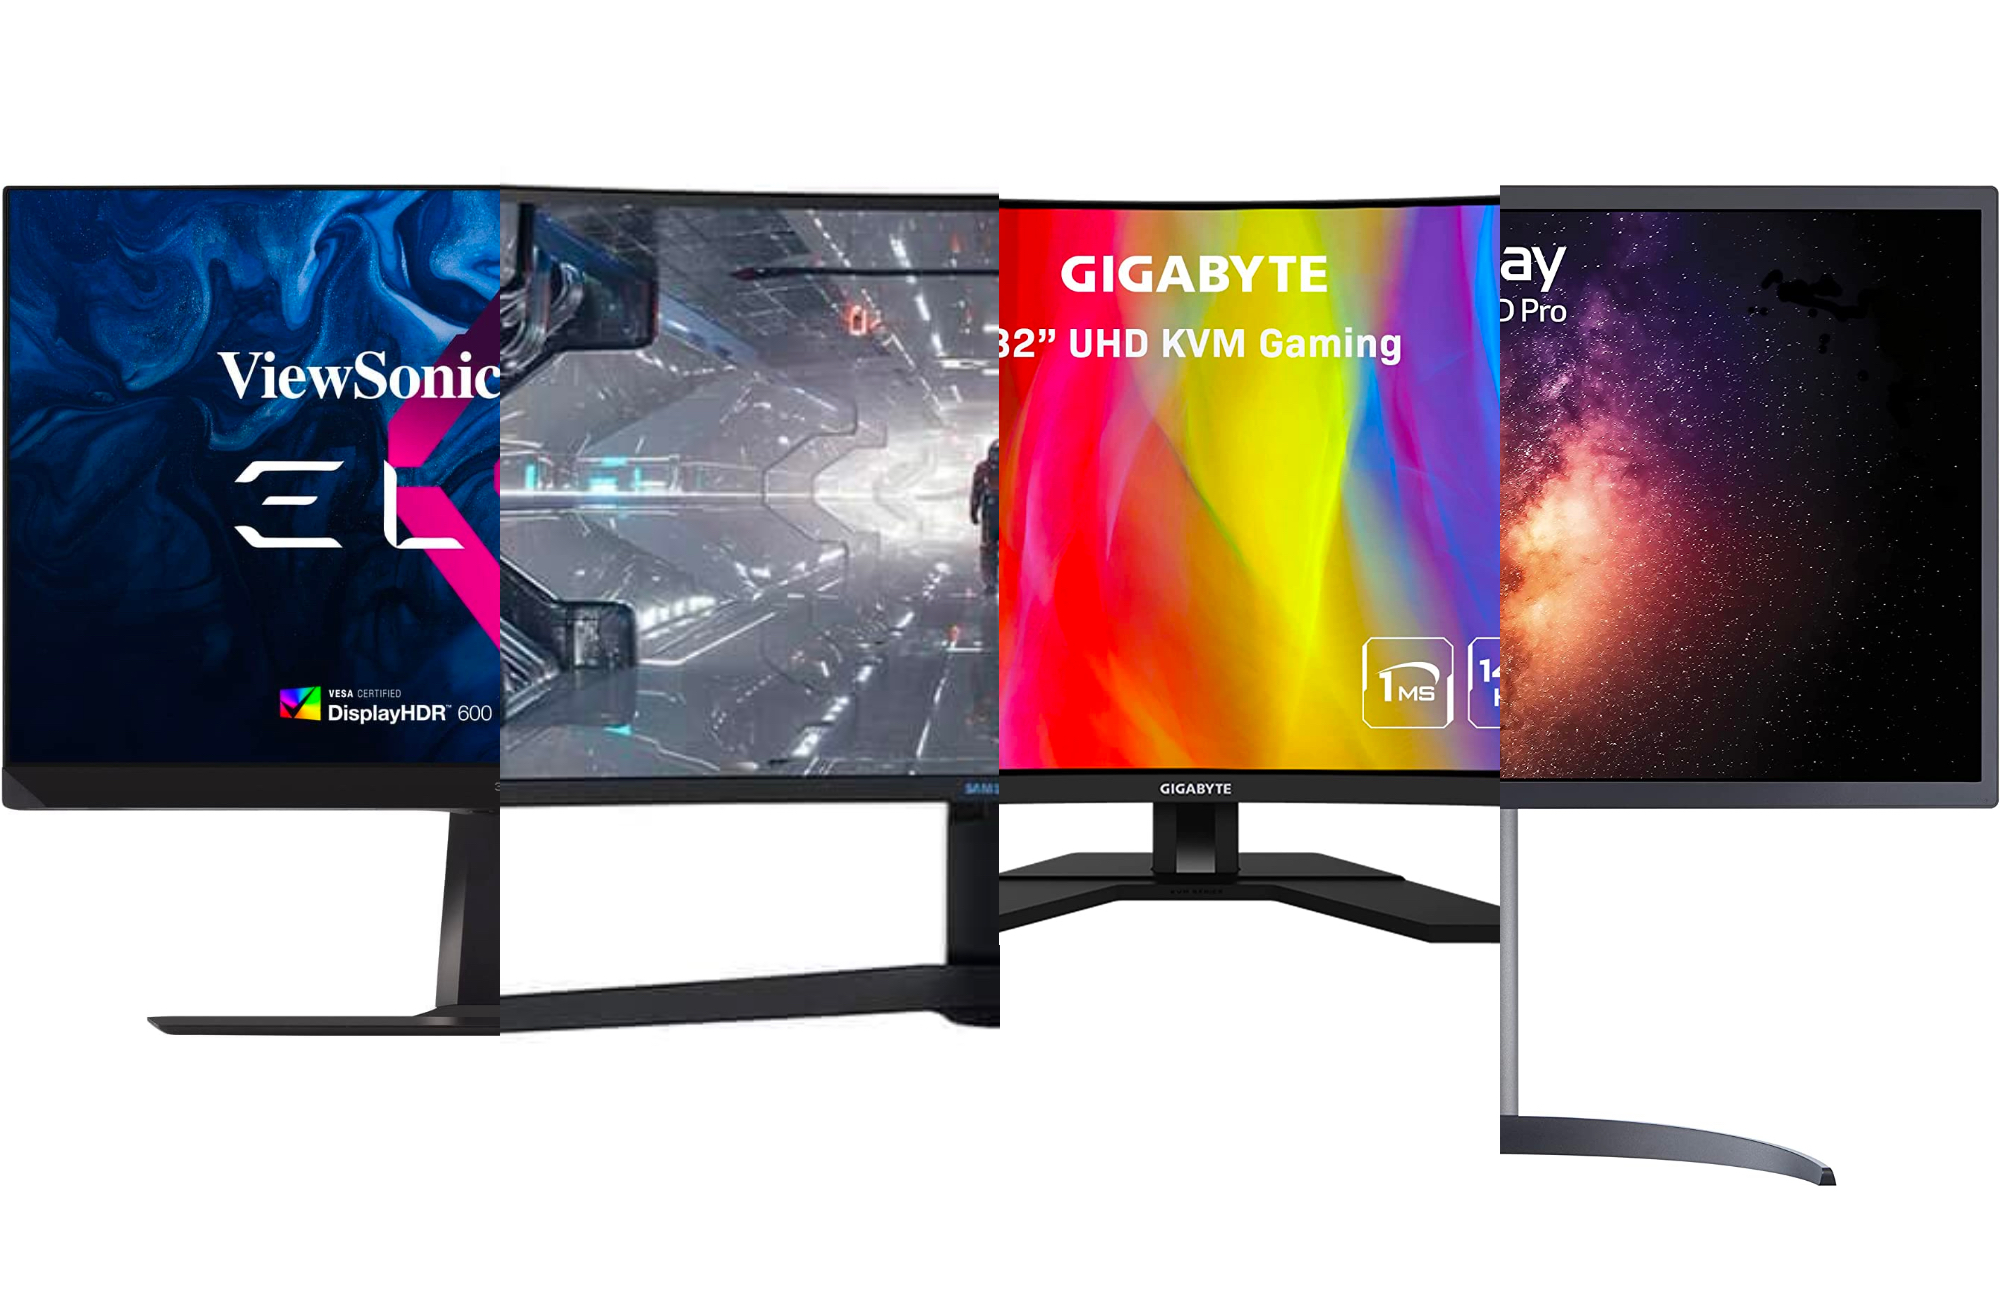 Best HDMI 2.1 gaming monitors in 2023! 